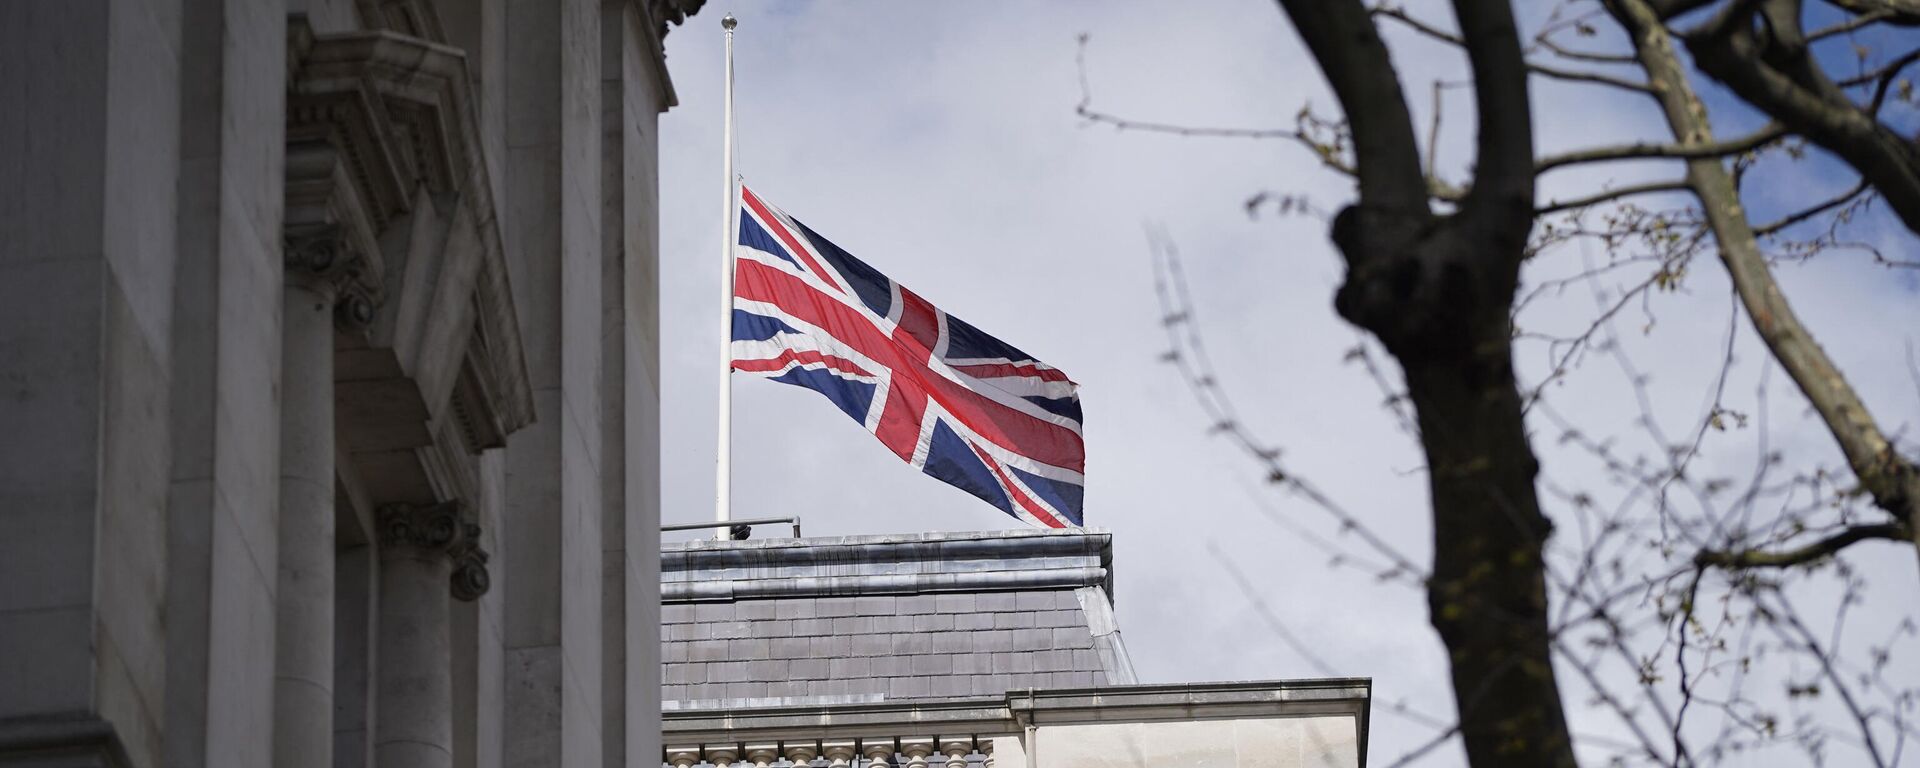 The Union Flag flies at half-mast over the Foreign, Commonwealth and Development Office in central London on April 9, 2021 after the announcement of the death of Britain's Prince Philip, Duke of Edinburgh. - Sputnik International, 1920, 07.12.2022